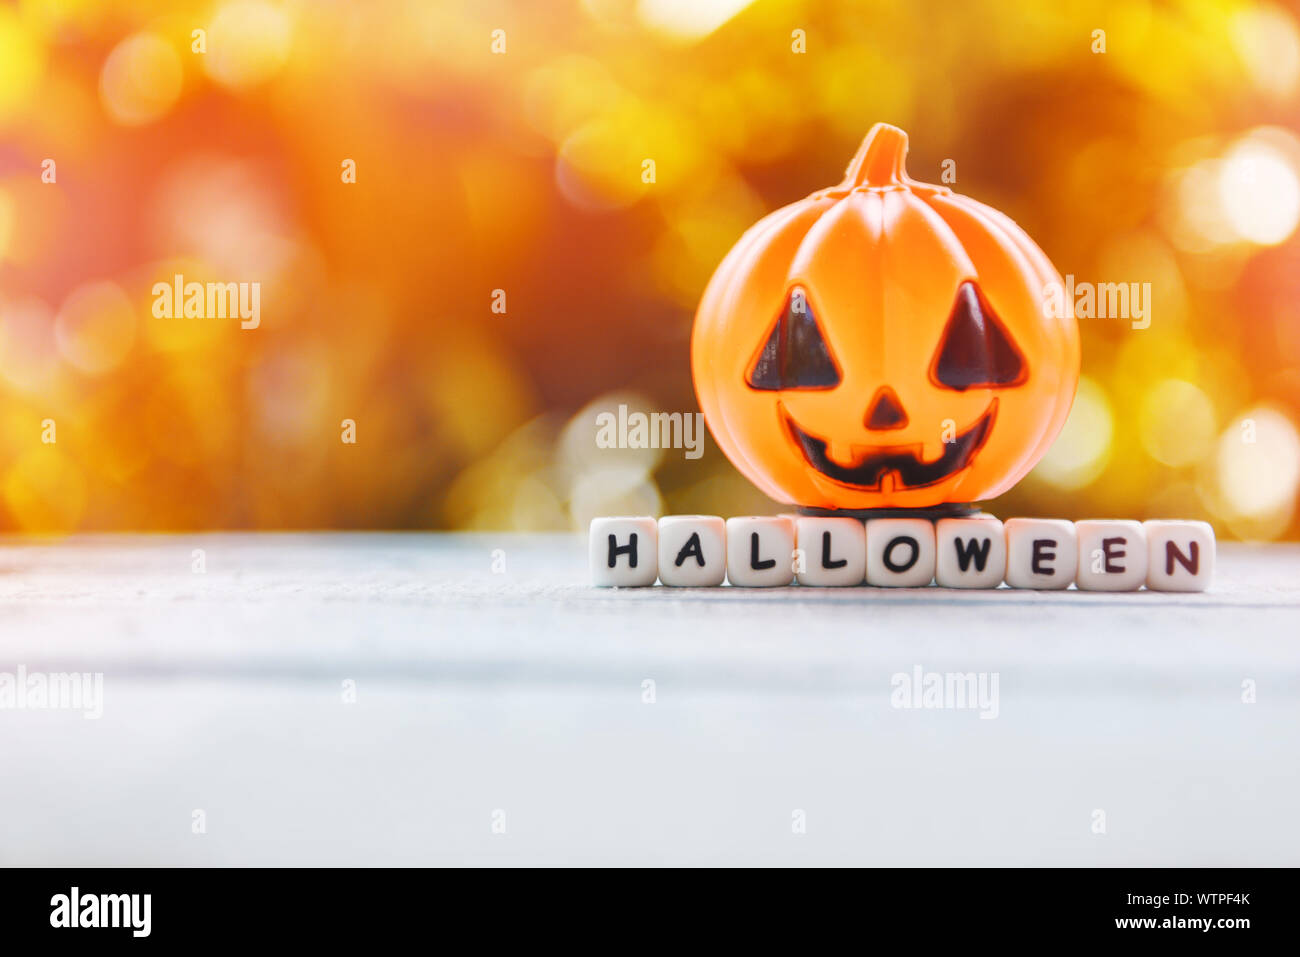 Halloween background decorated holidays festive concept / funny faces jack o lantern pumpkin halloween decorations for party accessories object  on wo Stock Photo